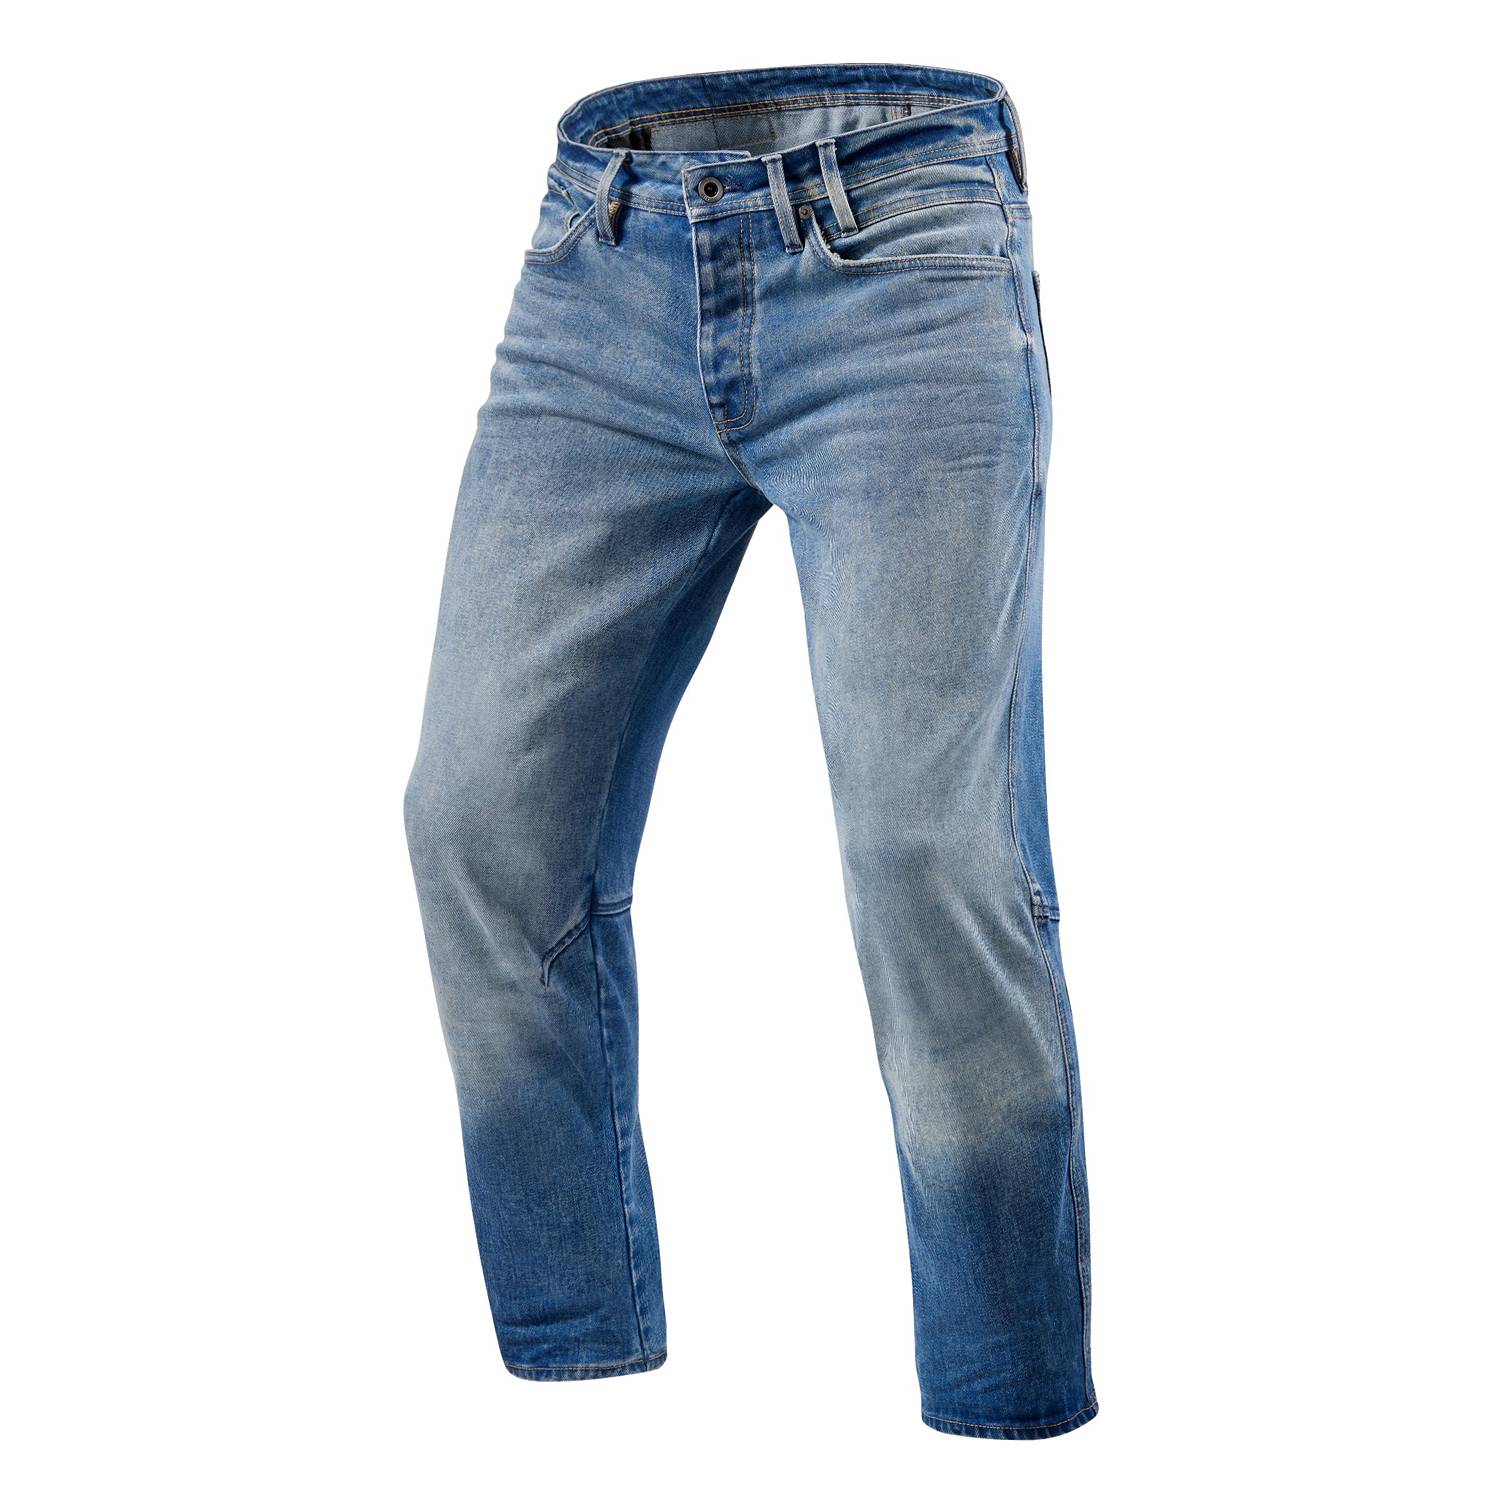 Image of REV'IT! Salt TF Mid Blue Used Motorcycle Jeans Taille L34/W30